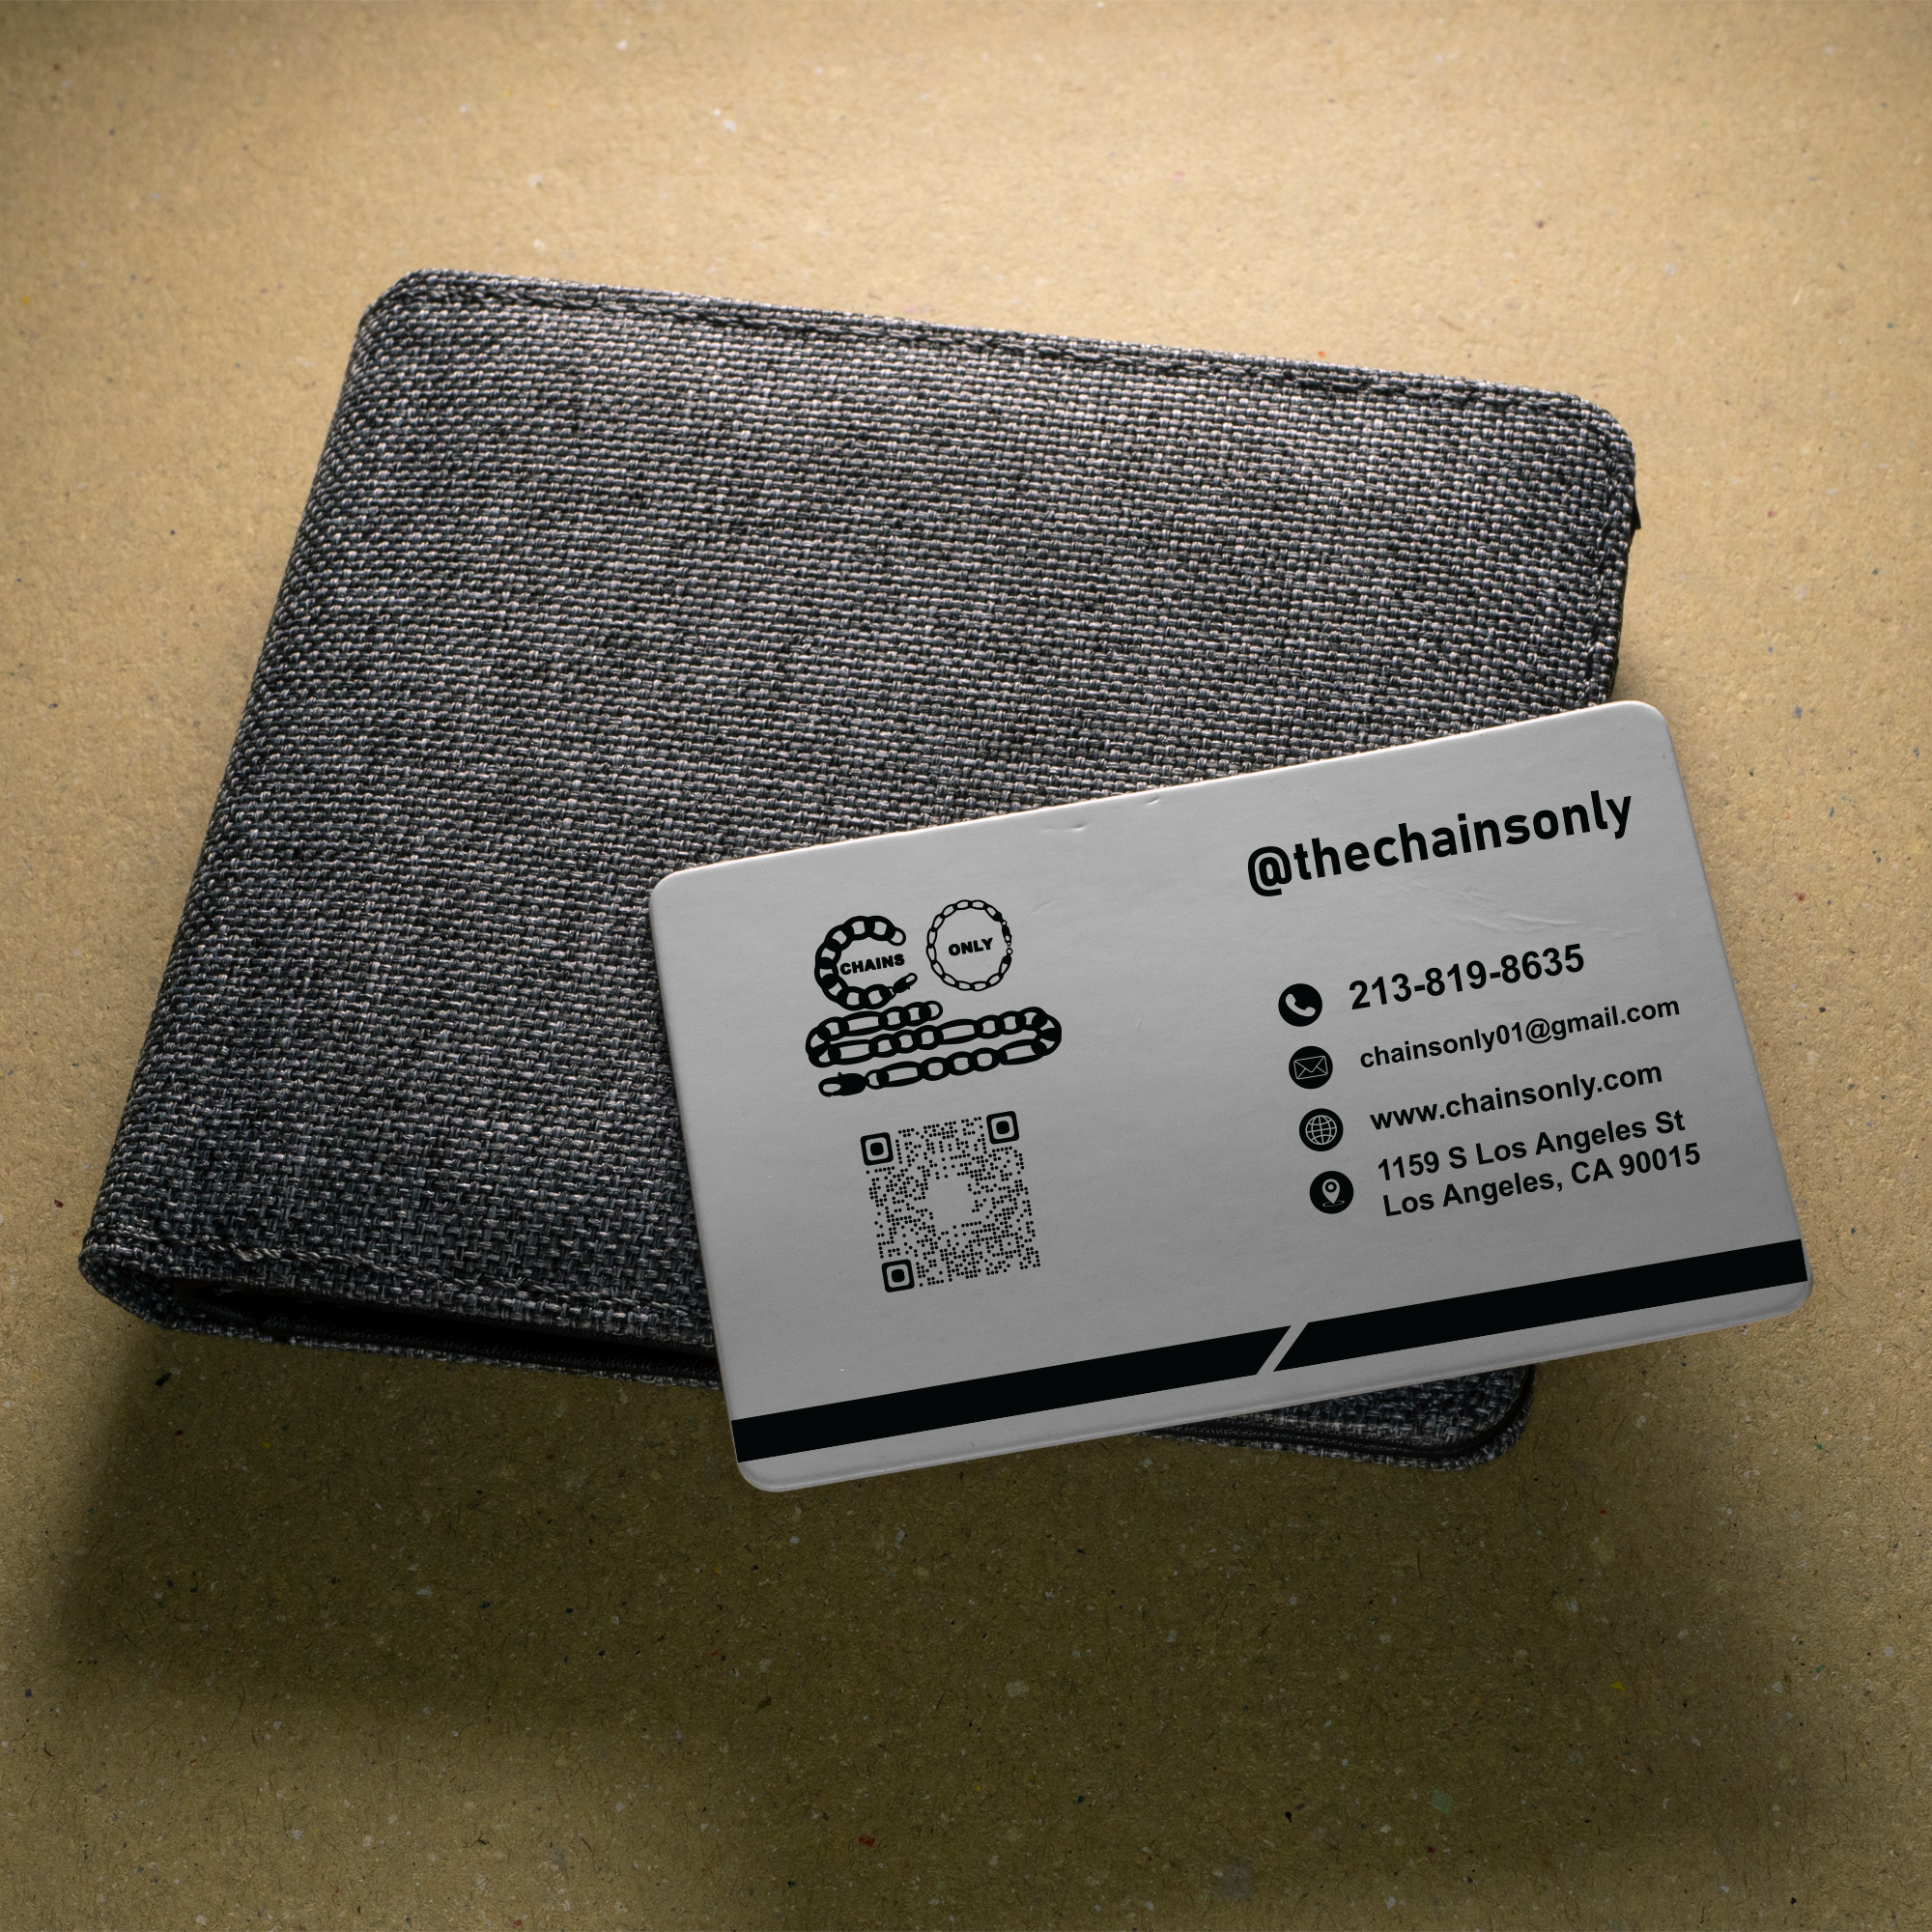  personalized wallet Card, real estate business cards, Agent Card